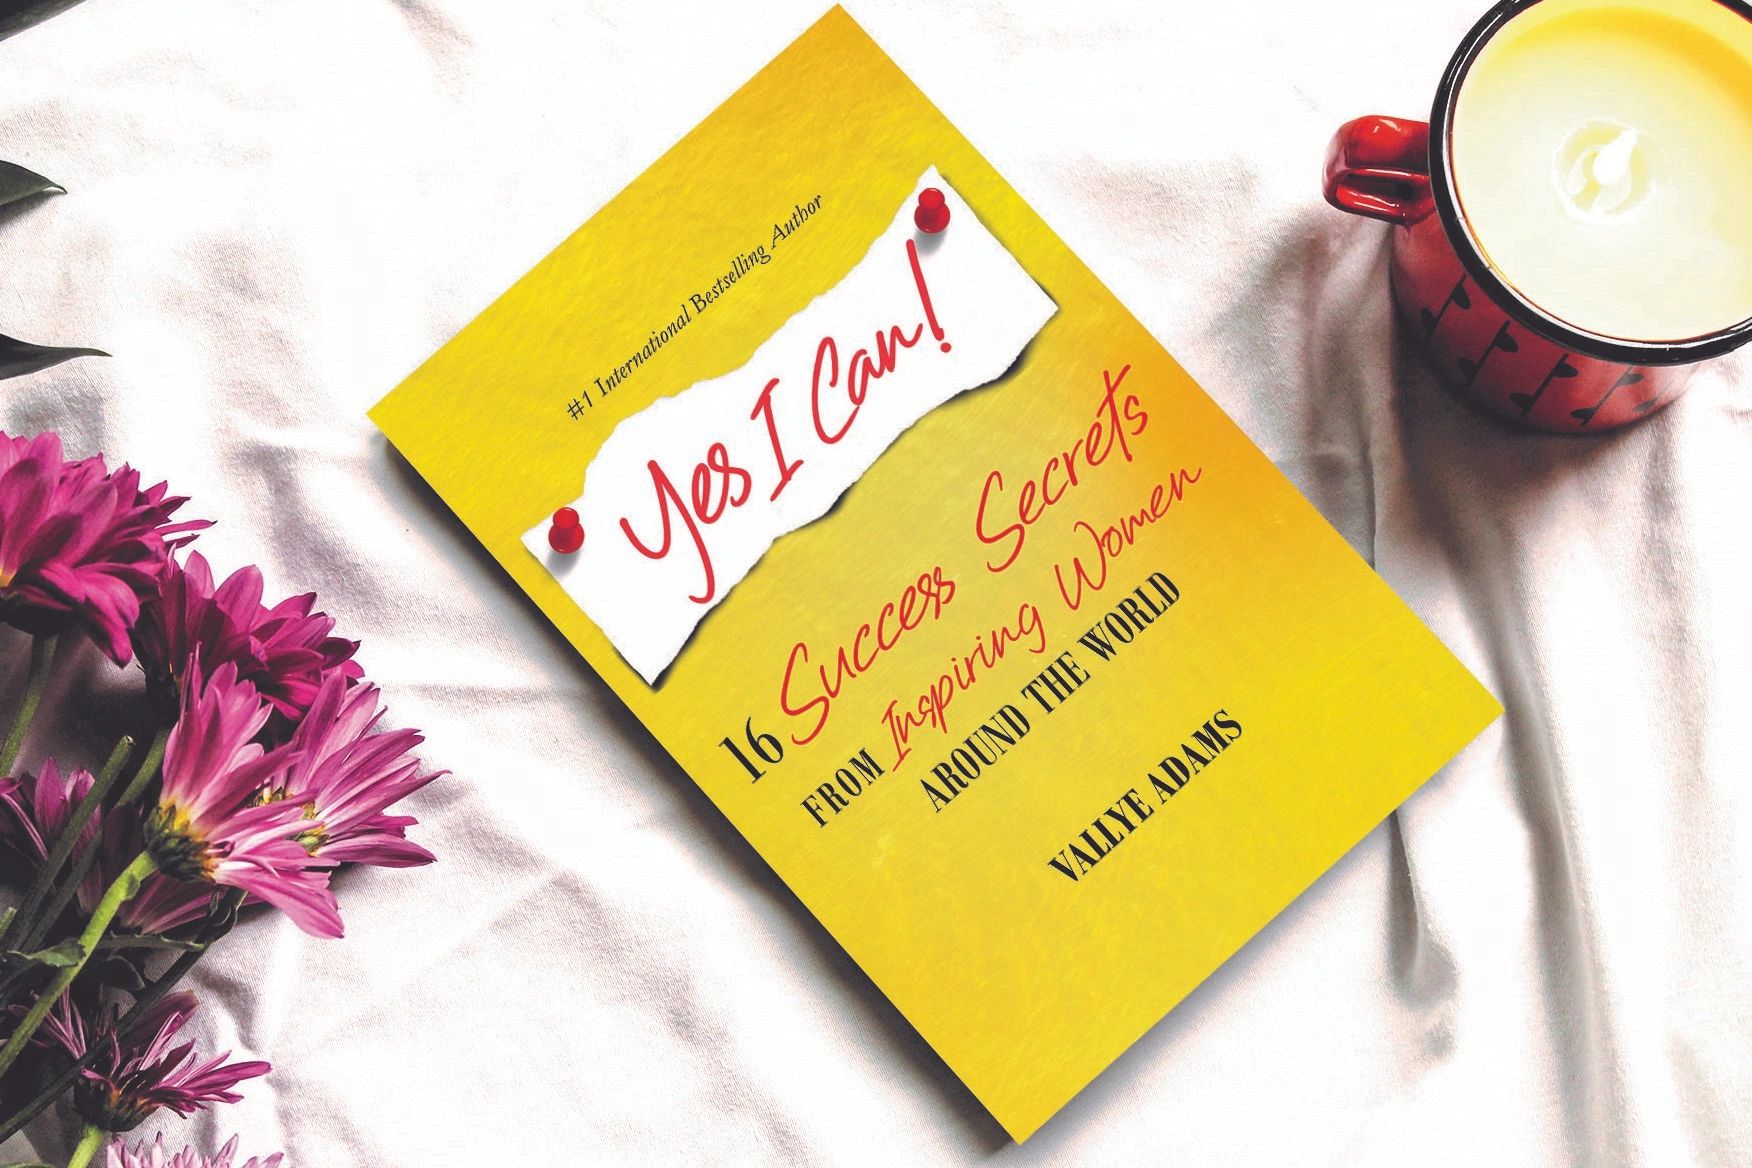 Yes I Can! success secrets book by Vallye Adams about inspiring women around the world